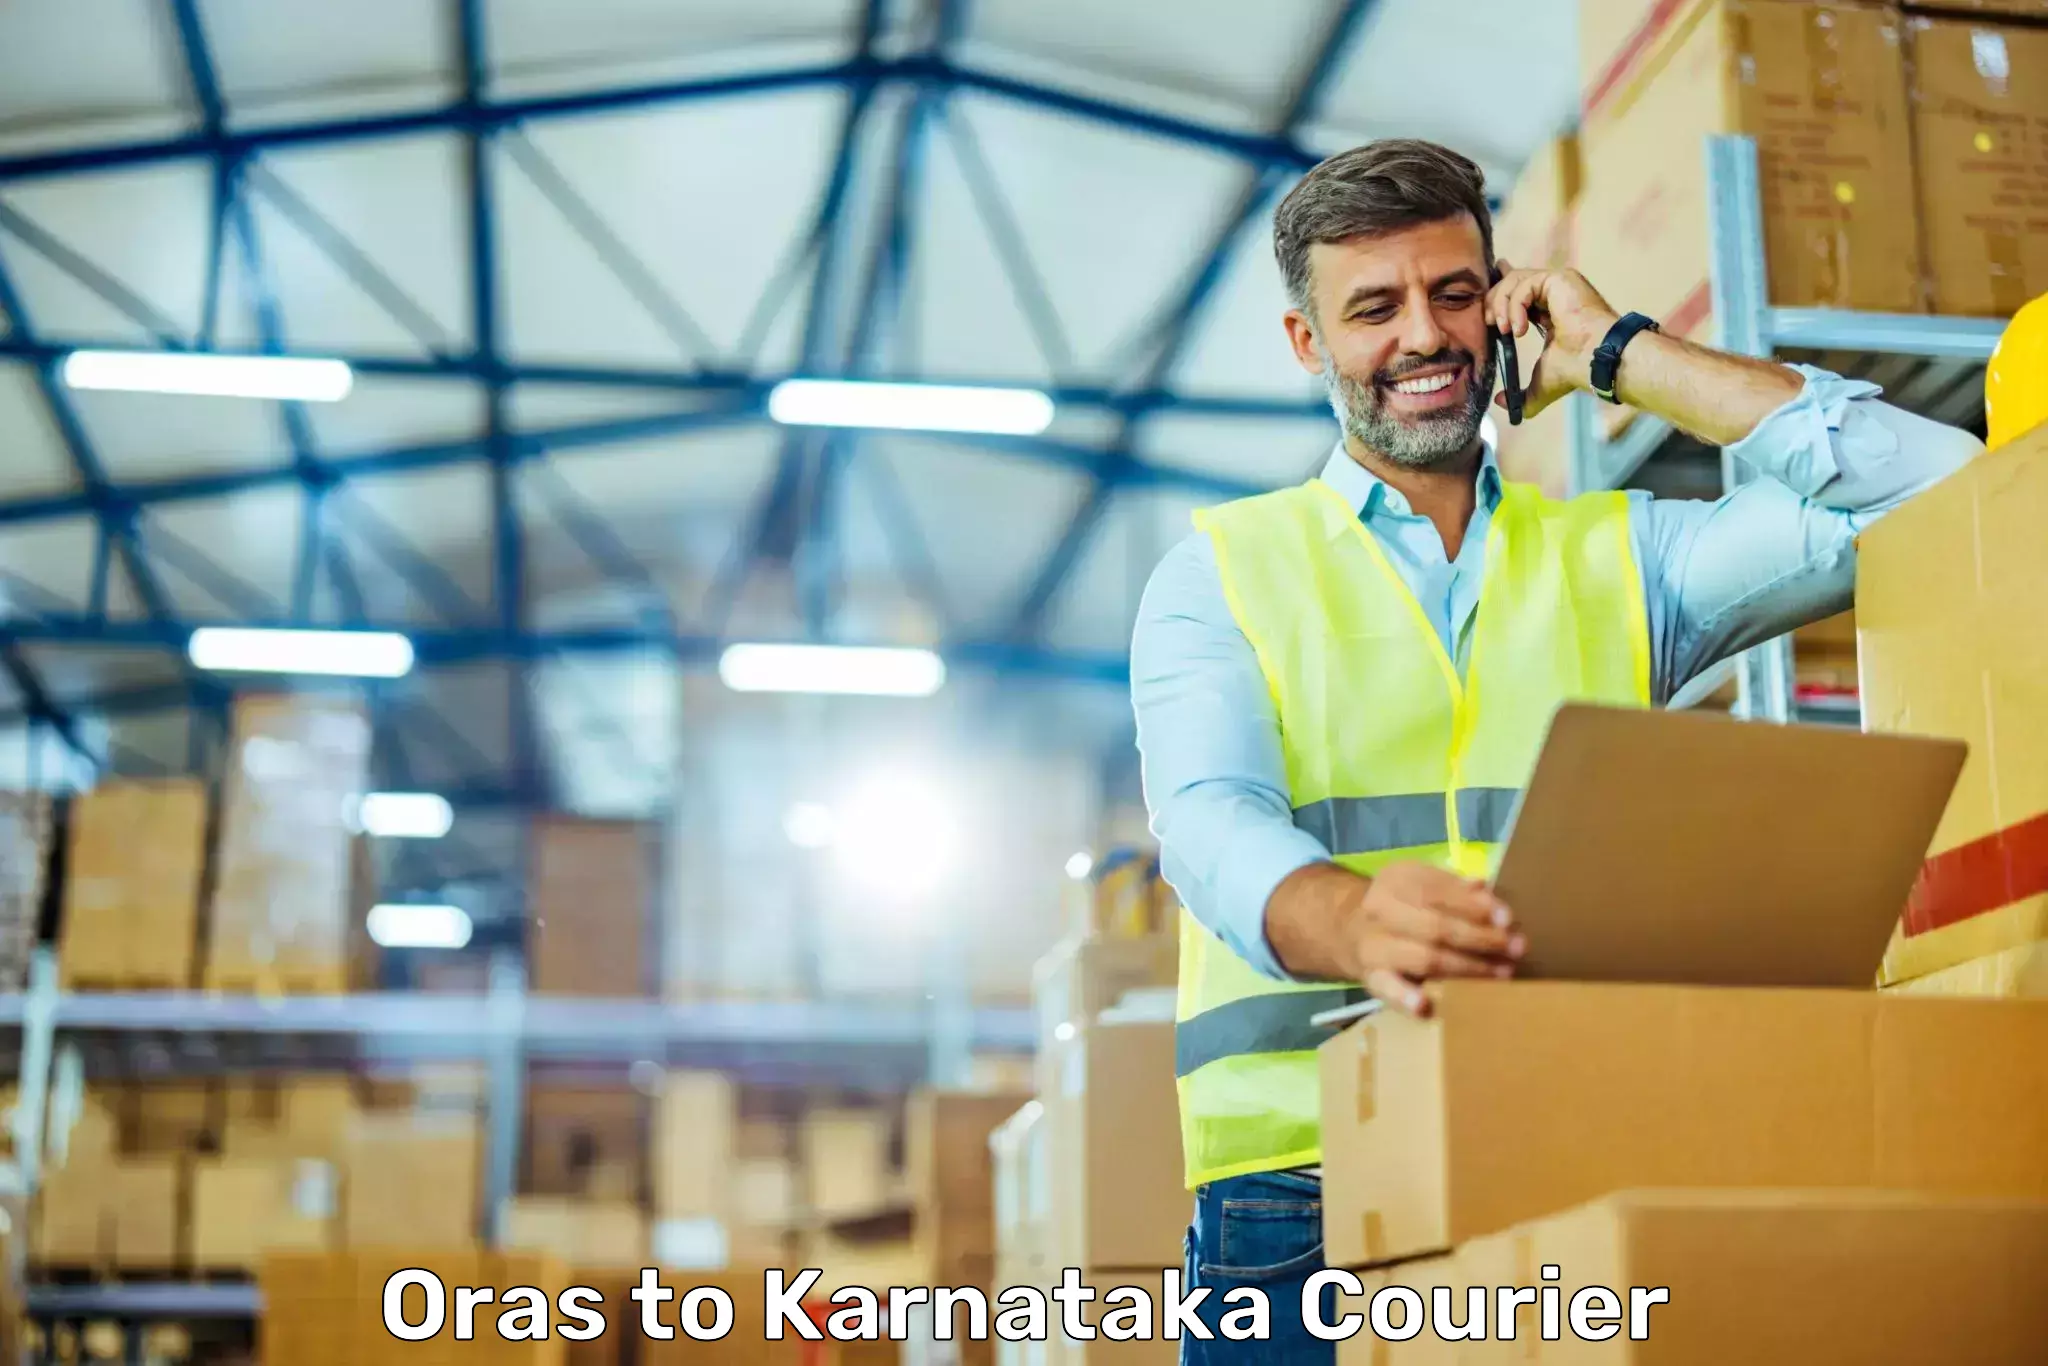 Package delivery network Oras to Sirsi